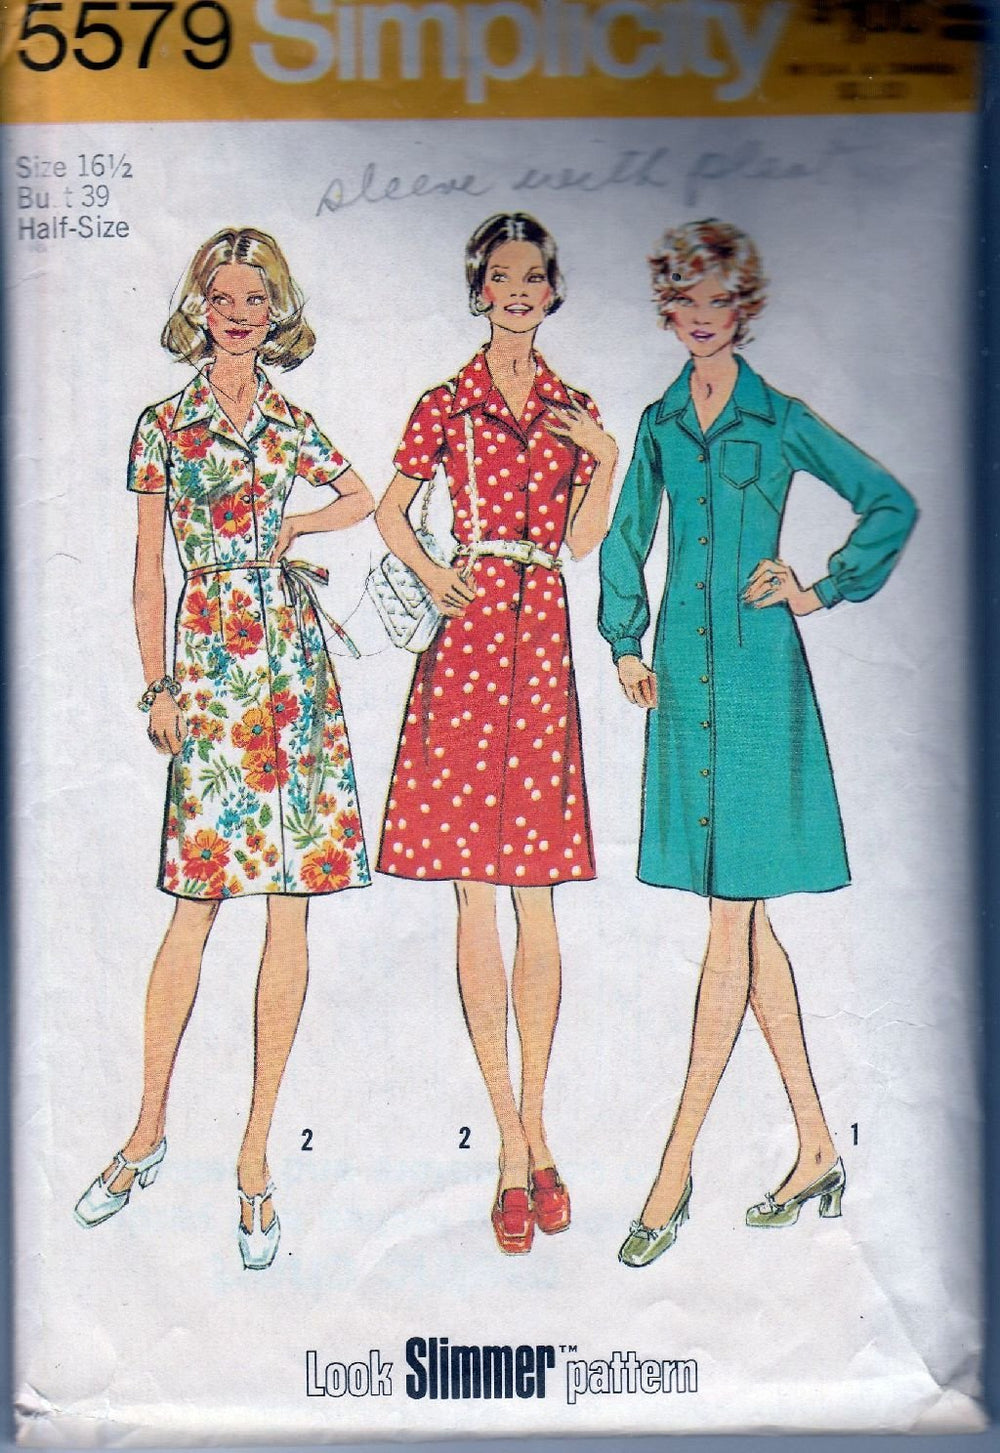 Simplicity 5579 Vintage 1970's Sewing Pattern Ladies Button Front Casual Day Dress - VintageStitching - Vintage Sewing Patterns